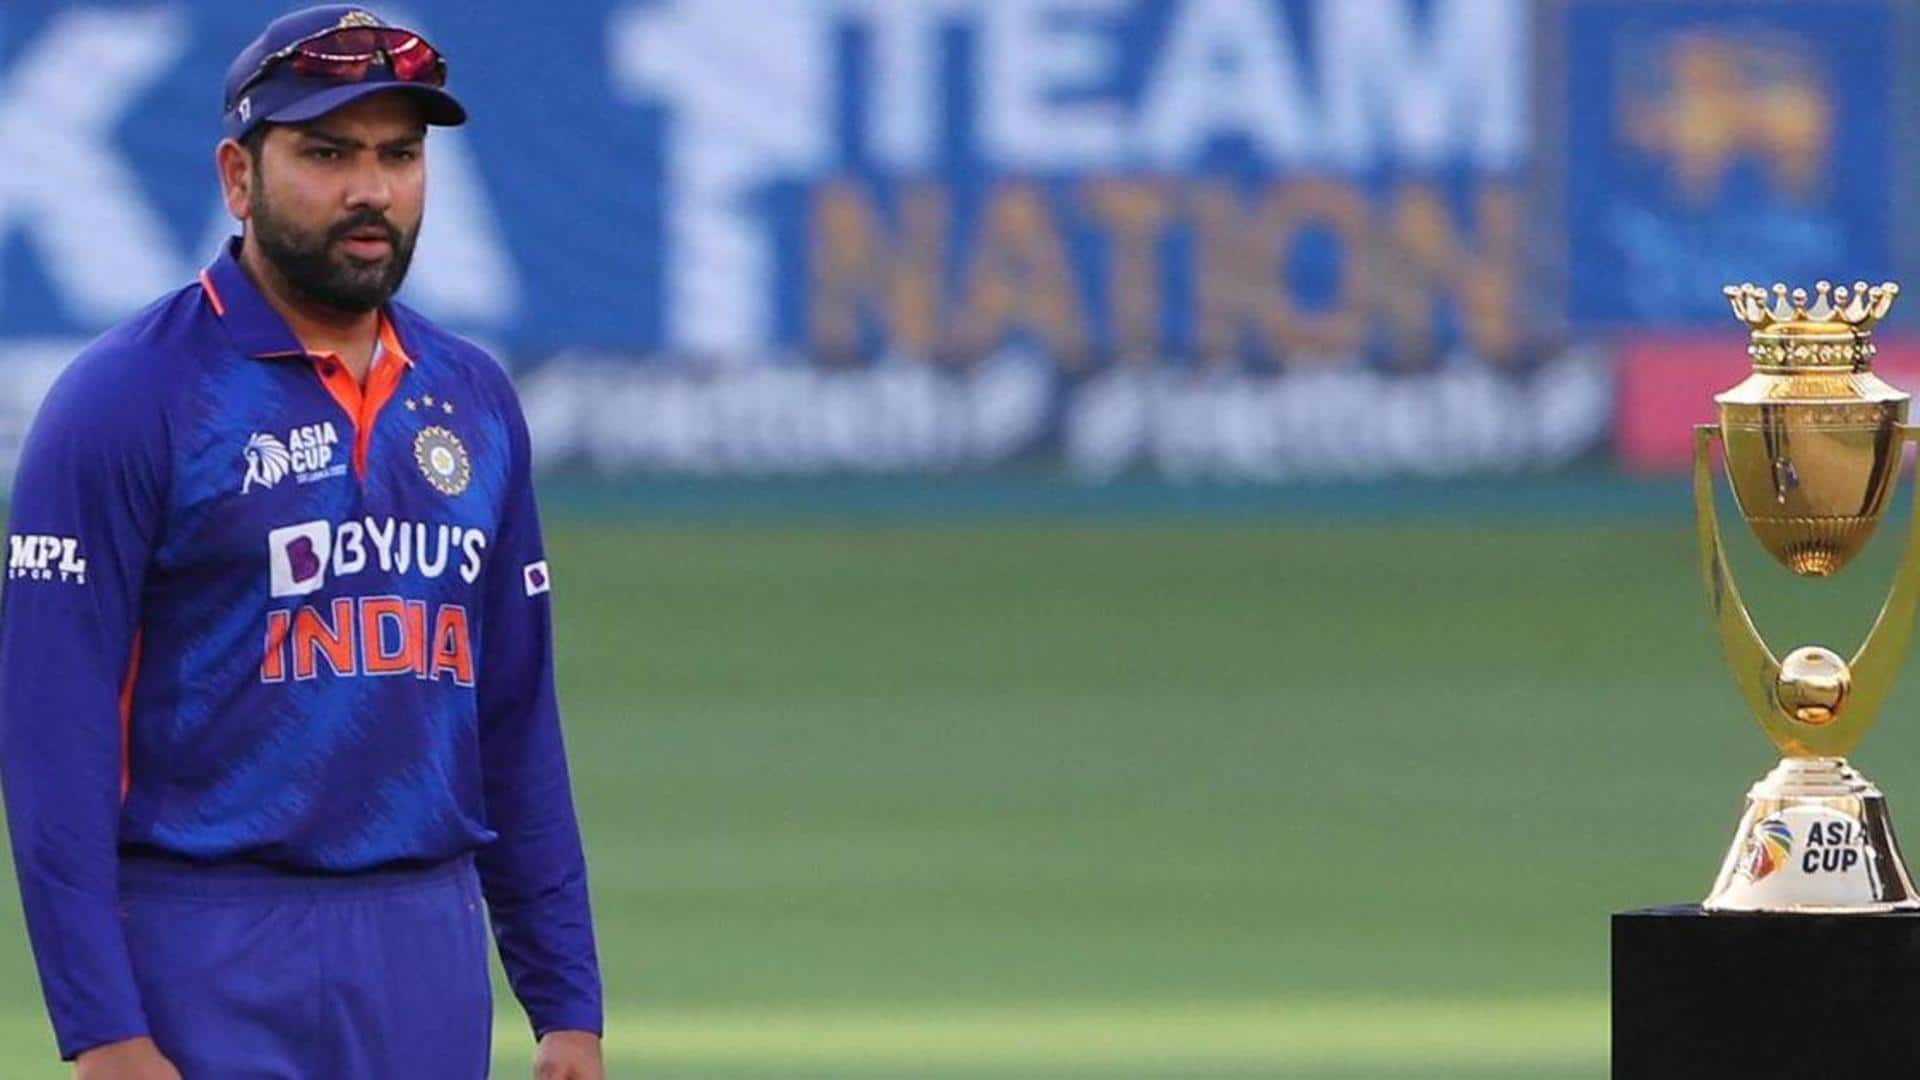 India's Asia Cup squad: Rahul, Iyer return; Tilak earns call-up